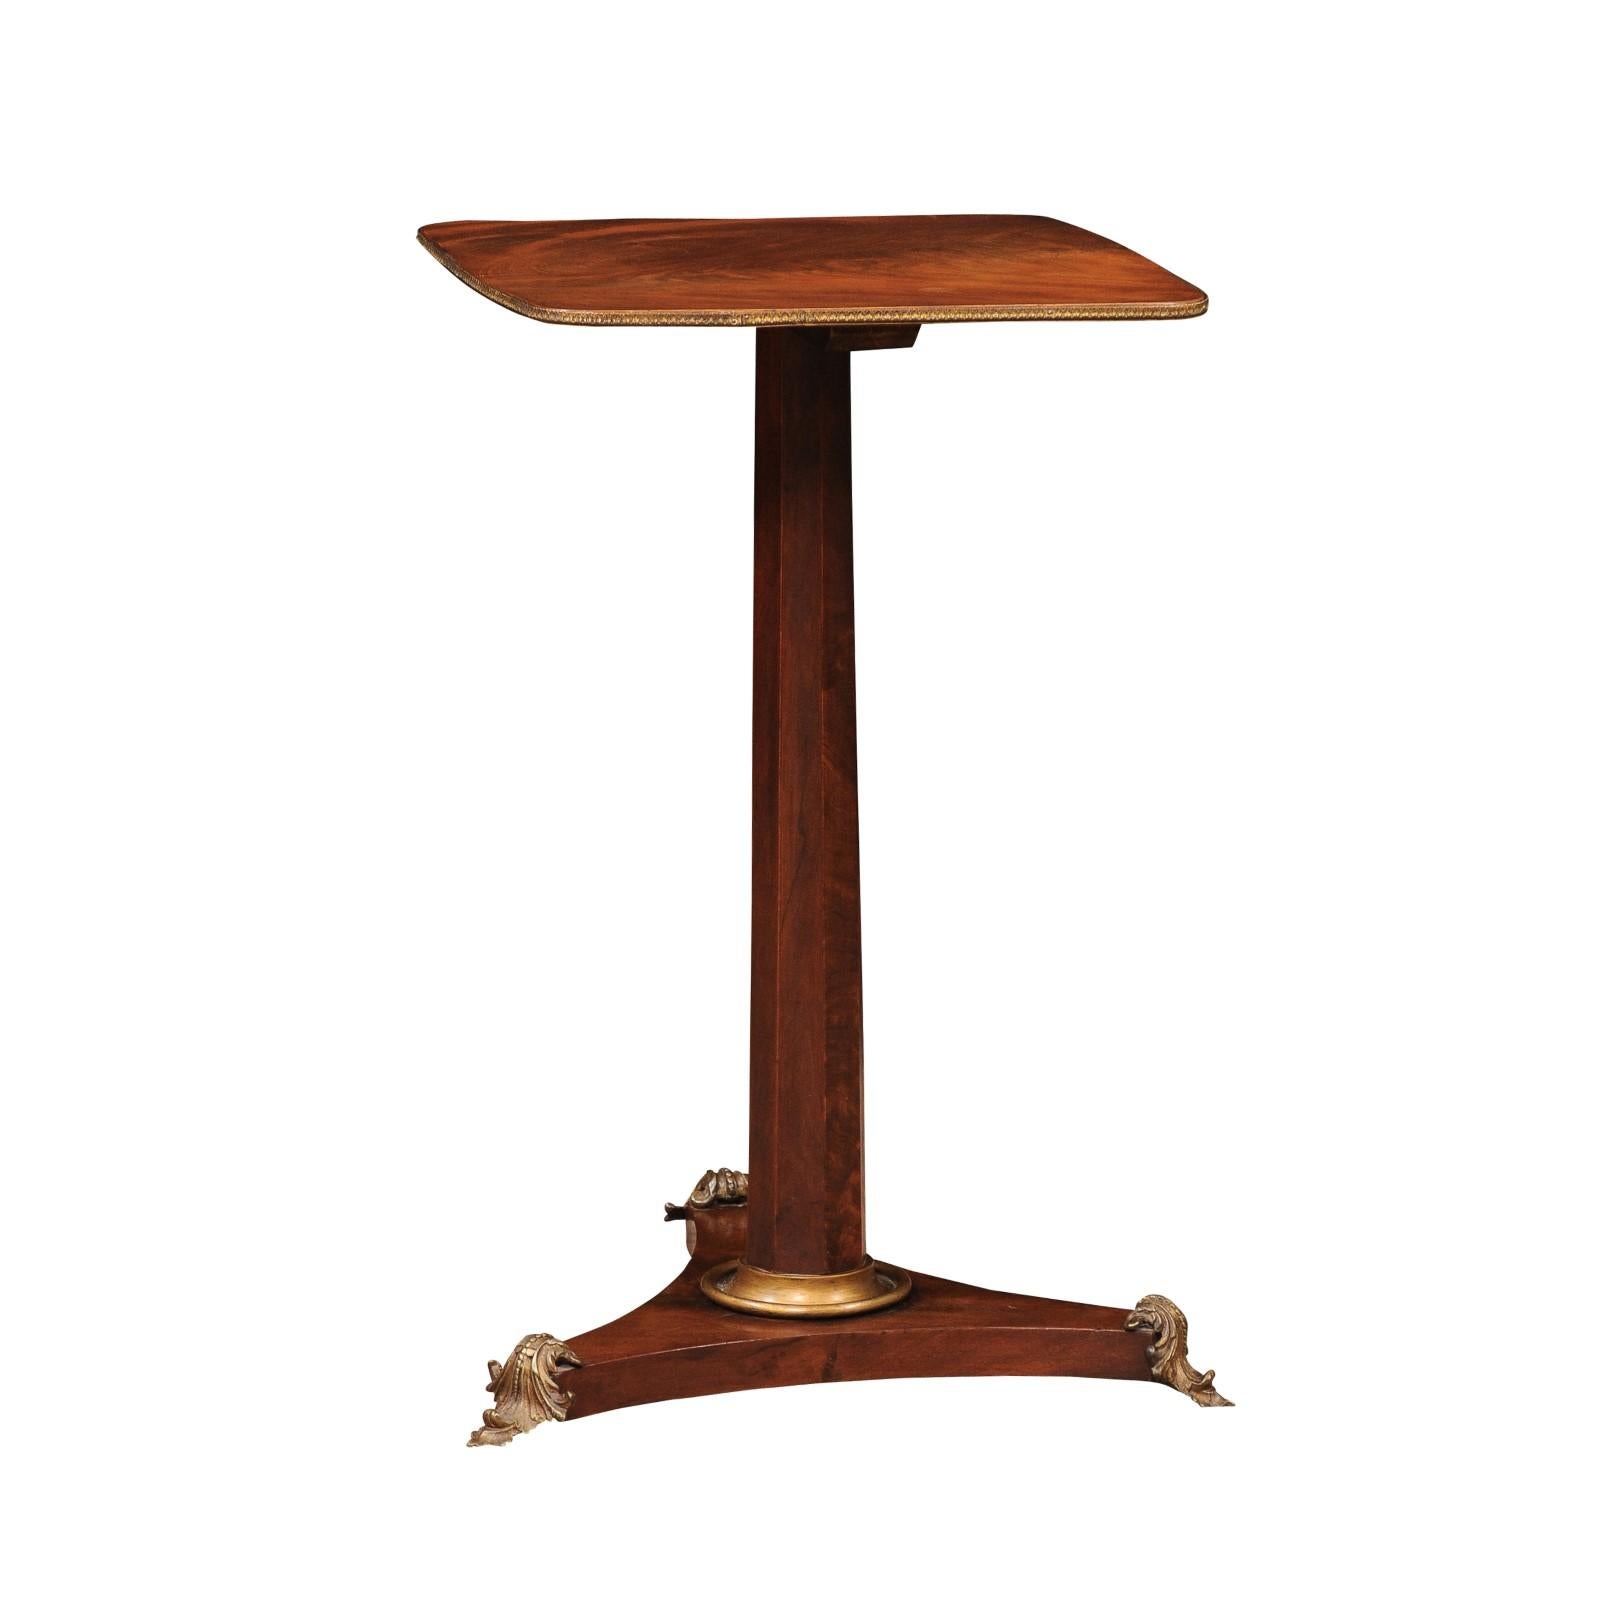 19th Century Continental Square Mahogany Drink Table with Ormalu Mounts For Sale 5